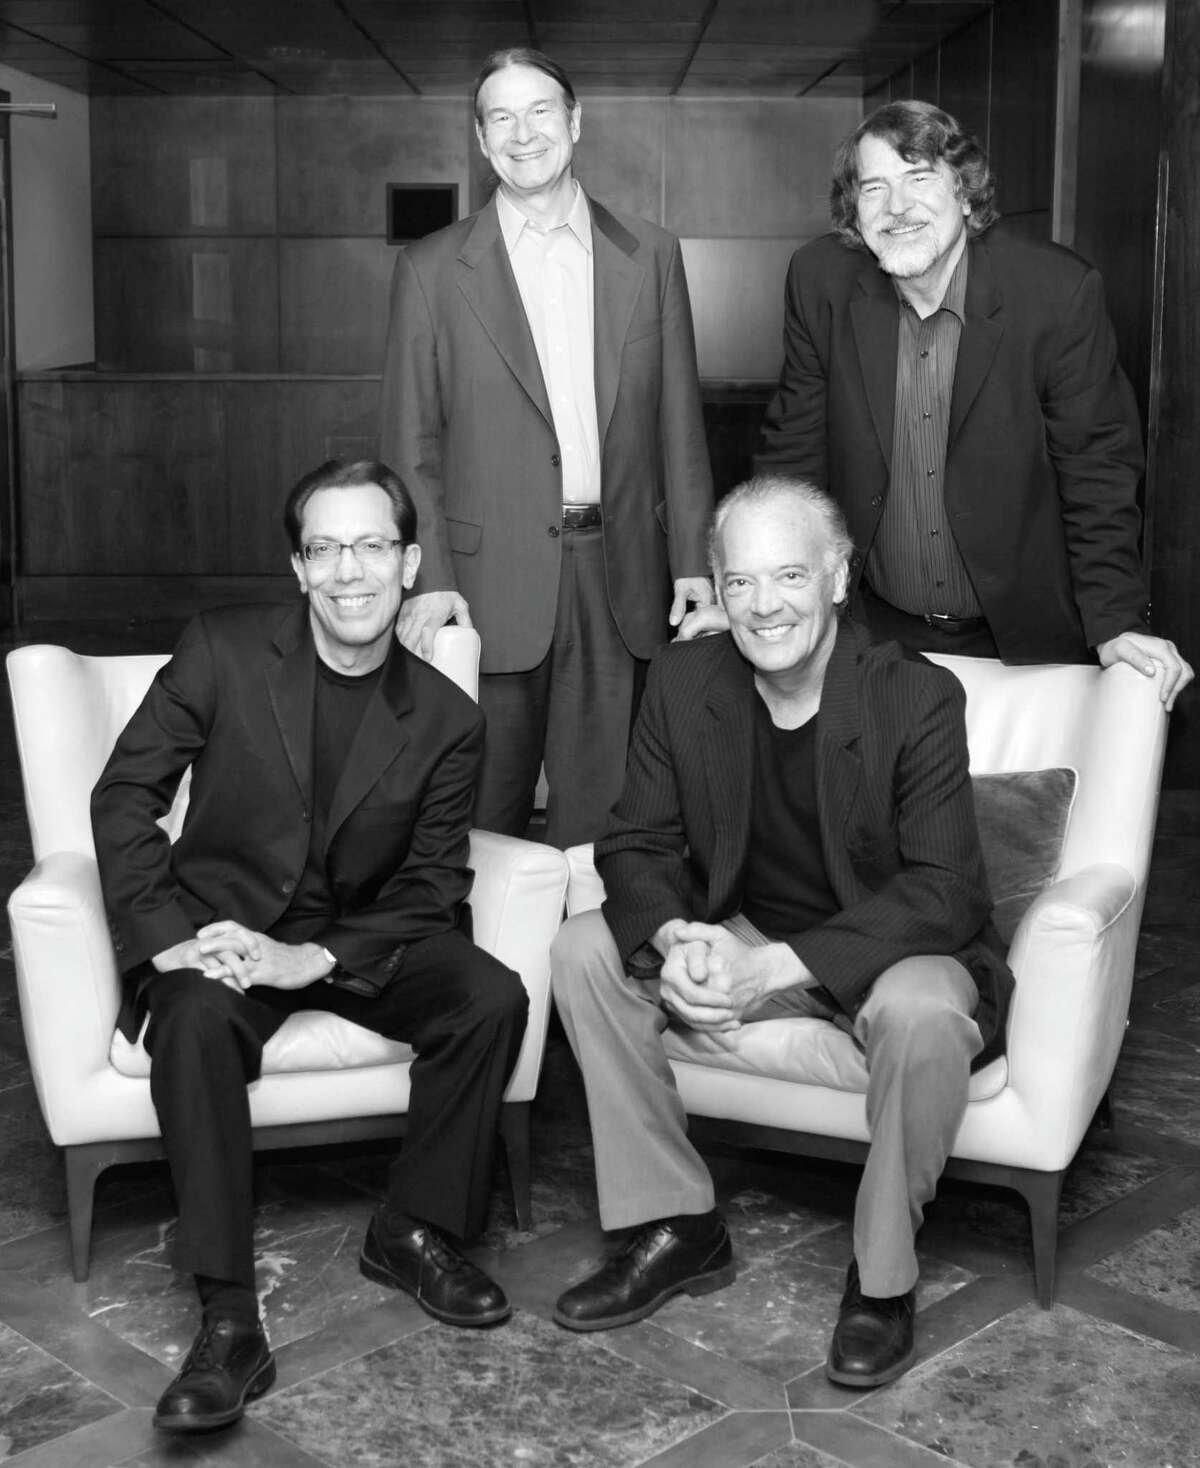 The Brubeck Brothers Quartet play at the Wilton Library on Sunday, Dec. 2.